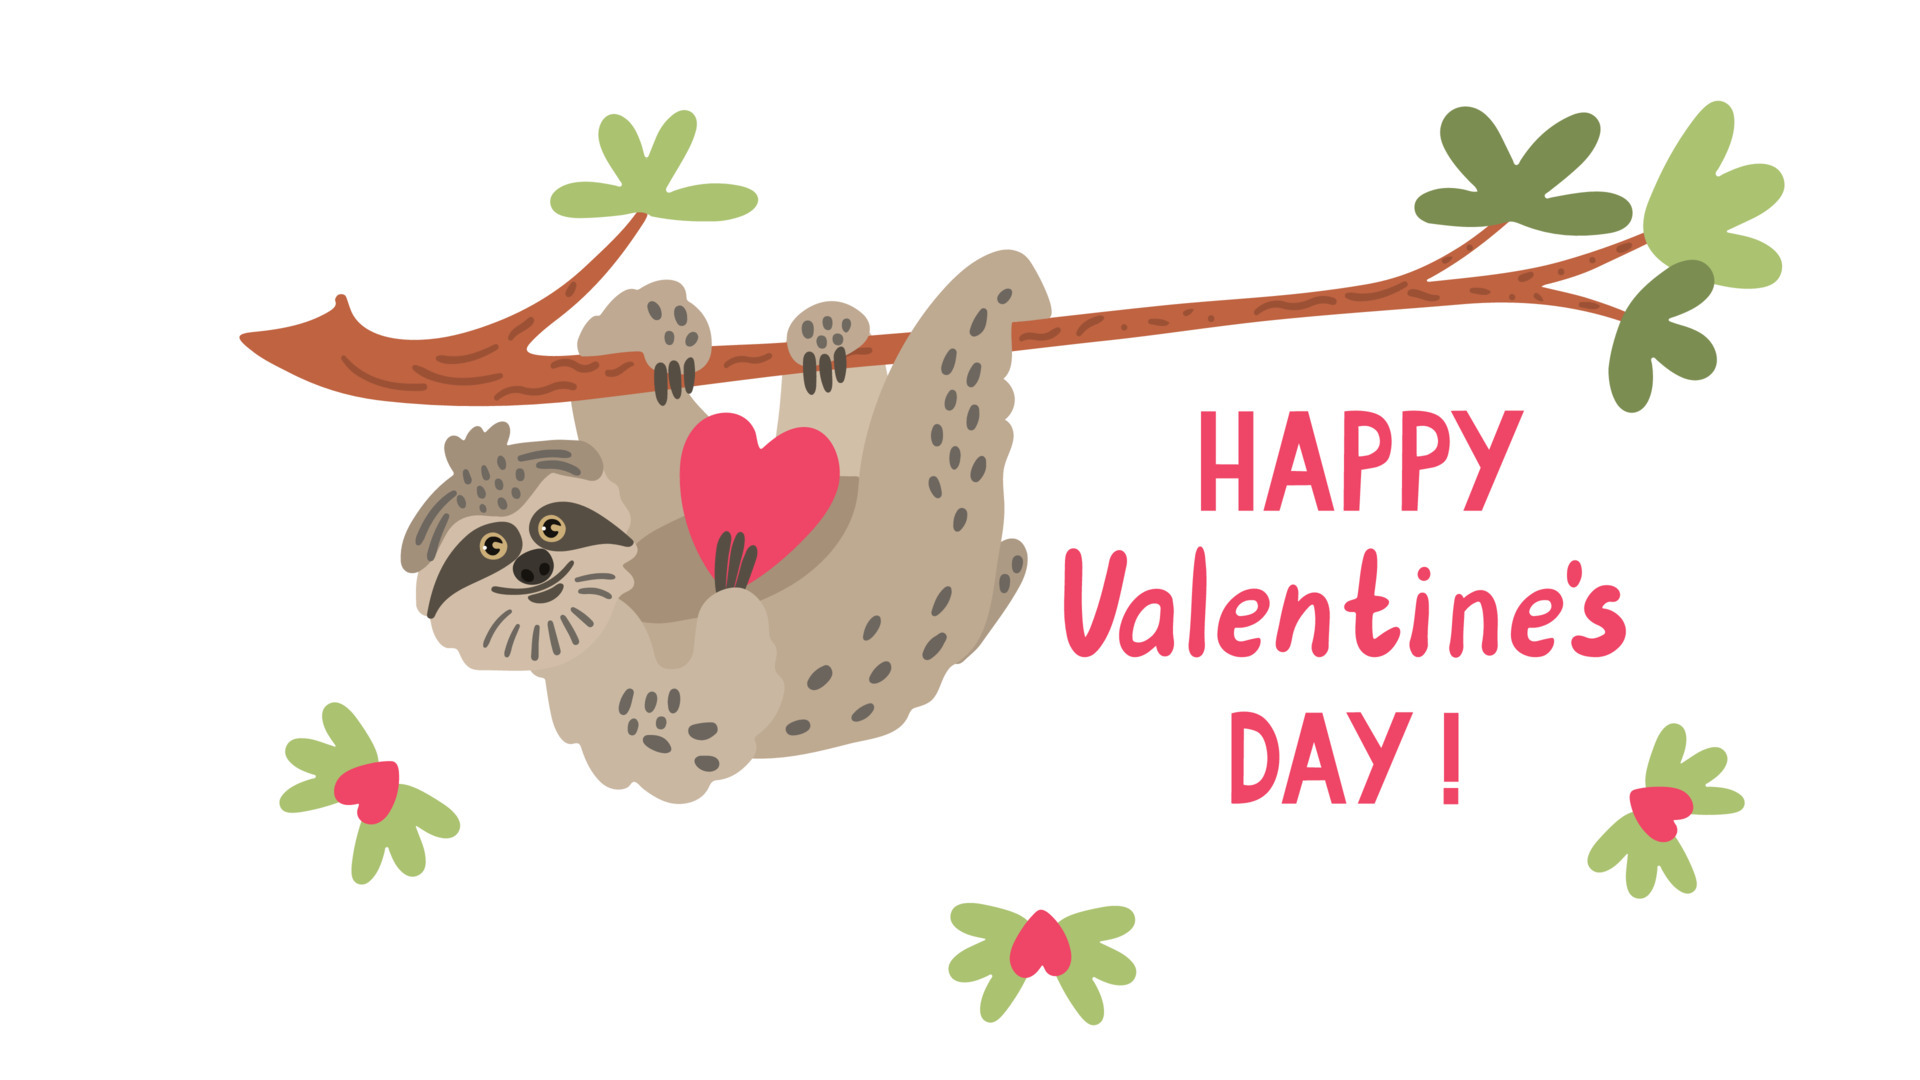 Happy Valentines Day. Quote with a cute sloth hanging on the branch. It holds a heart. Greeting card